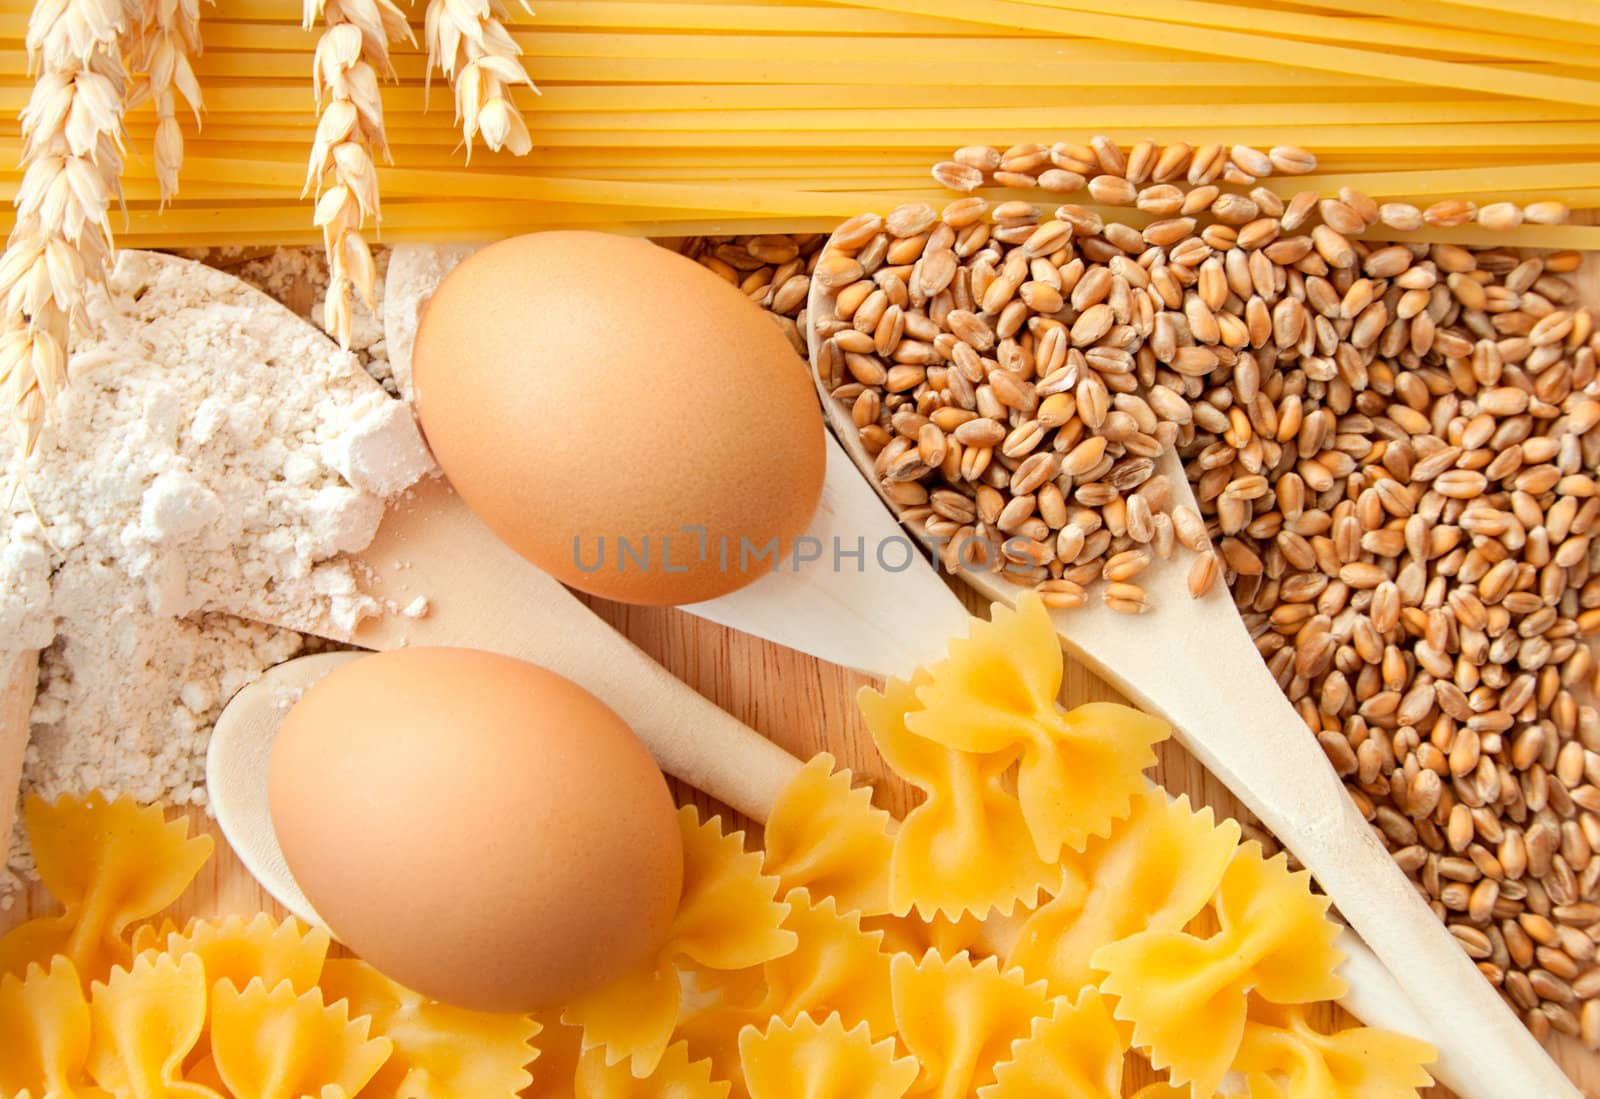 ingredients for homemade pasta. Food background: macaroni, spagetti, egg, flour, wheat 